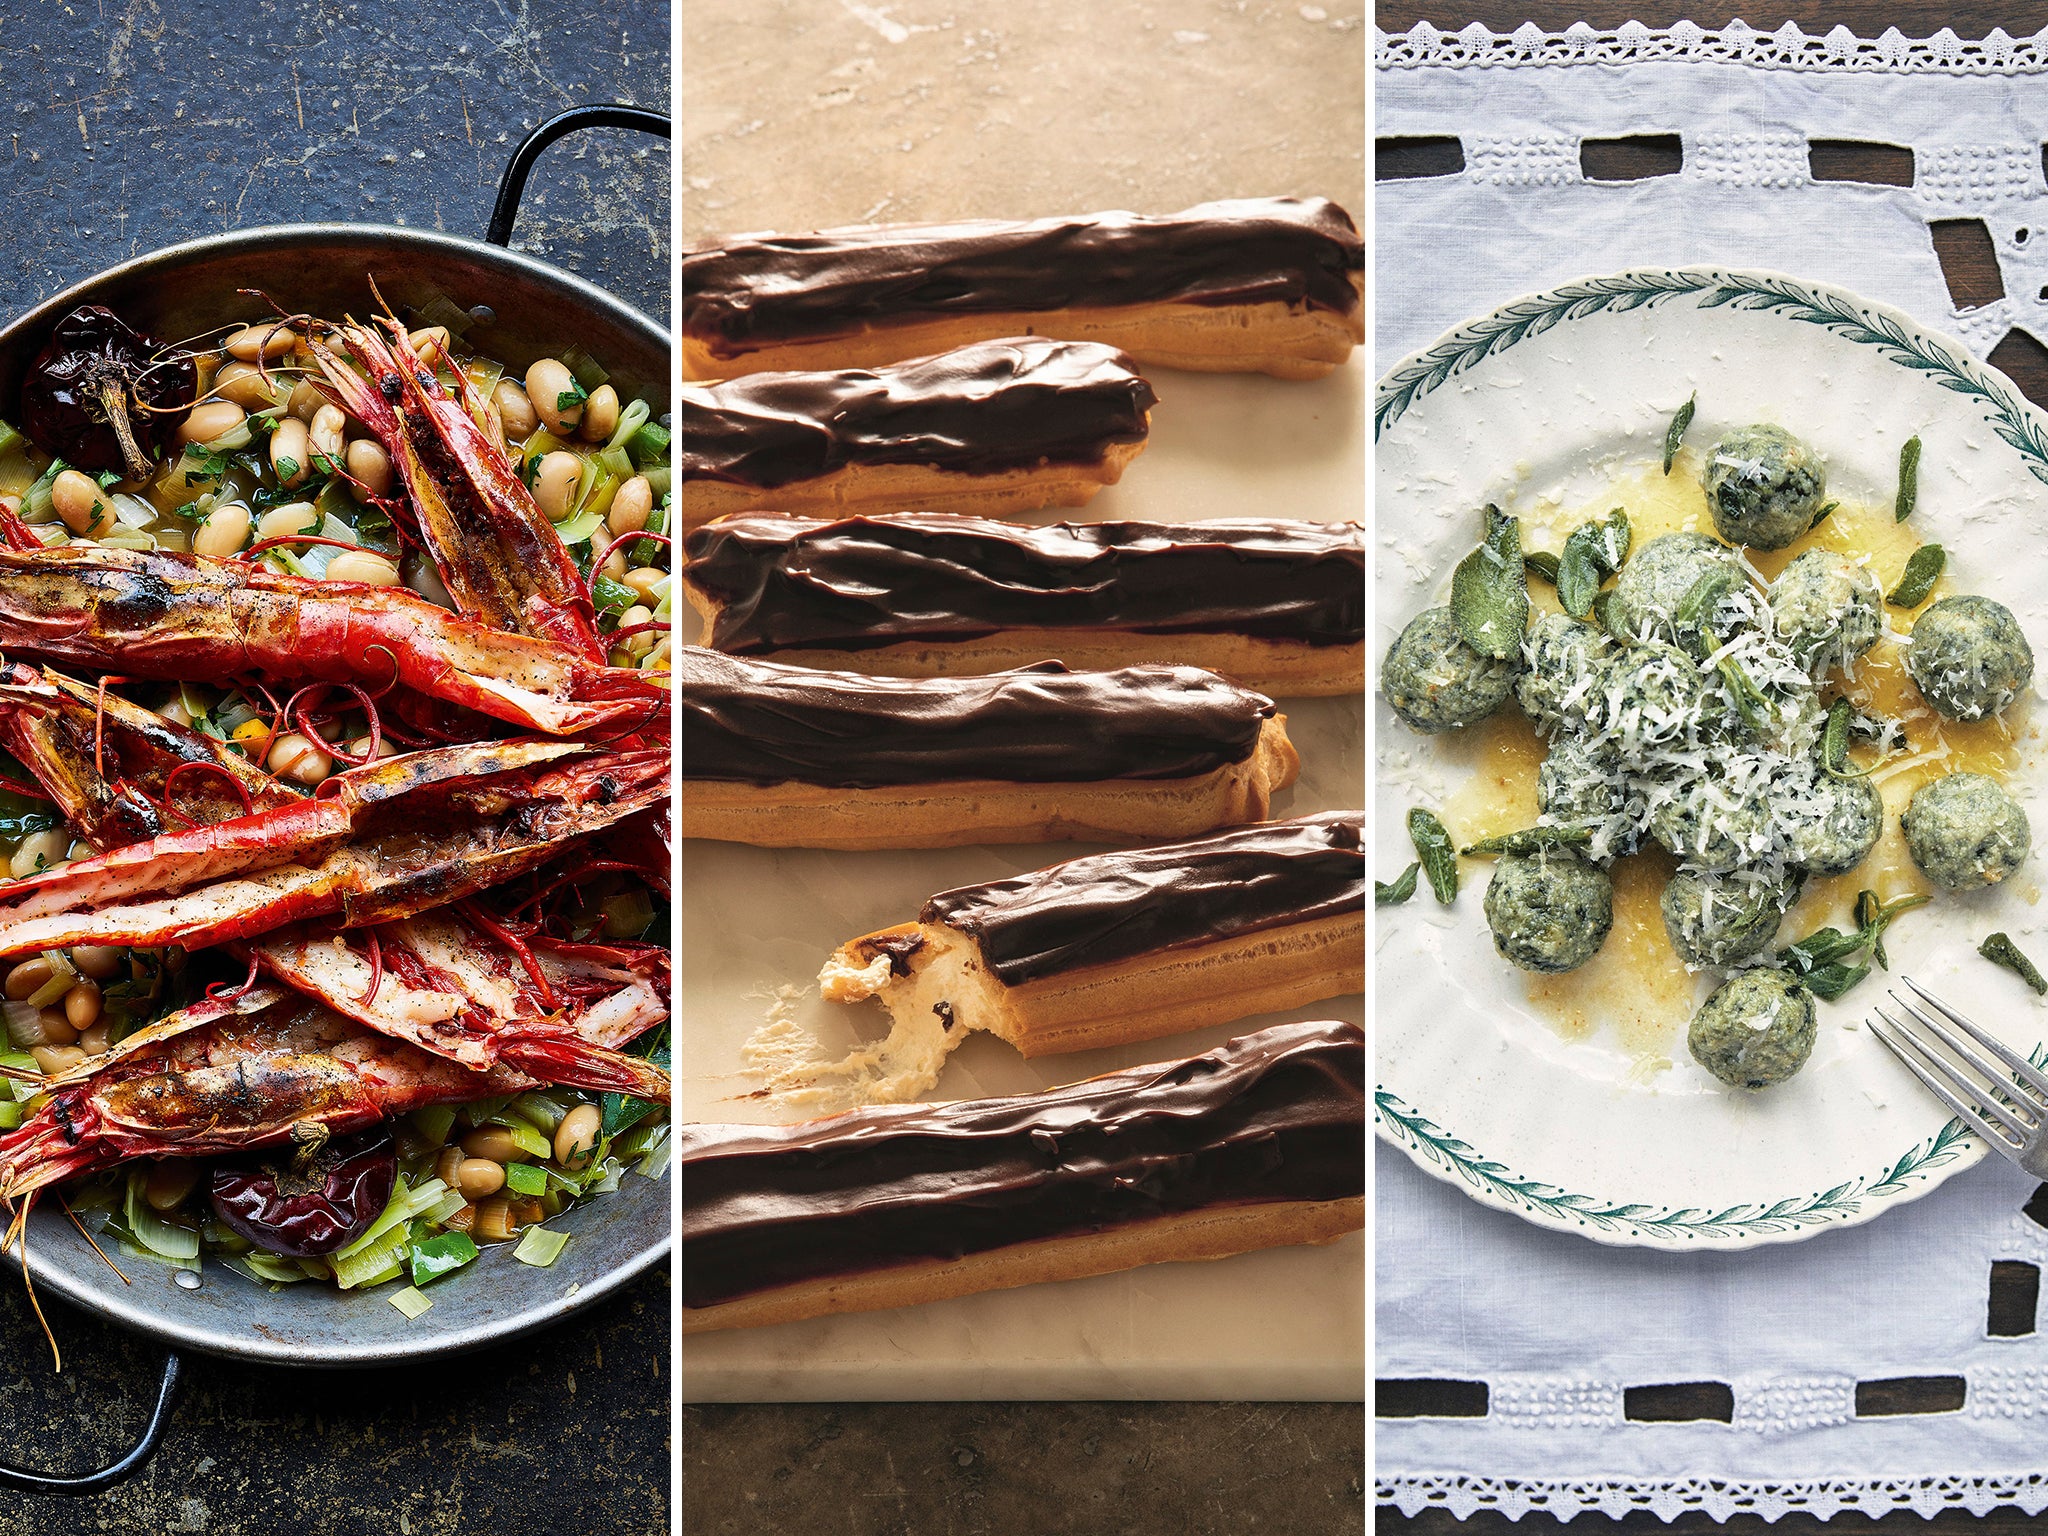 There’s plenty of new cookbook releases – and recipes – to sink your teeth into